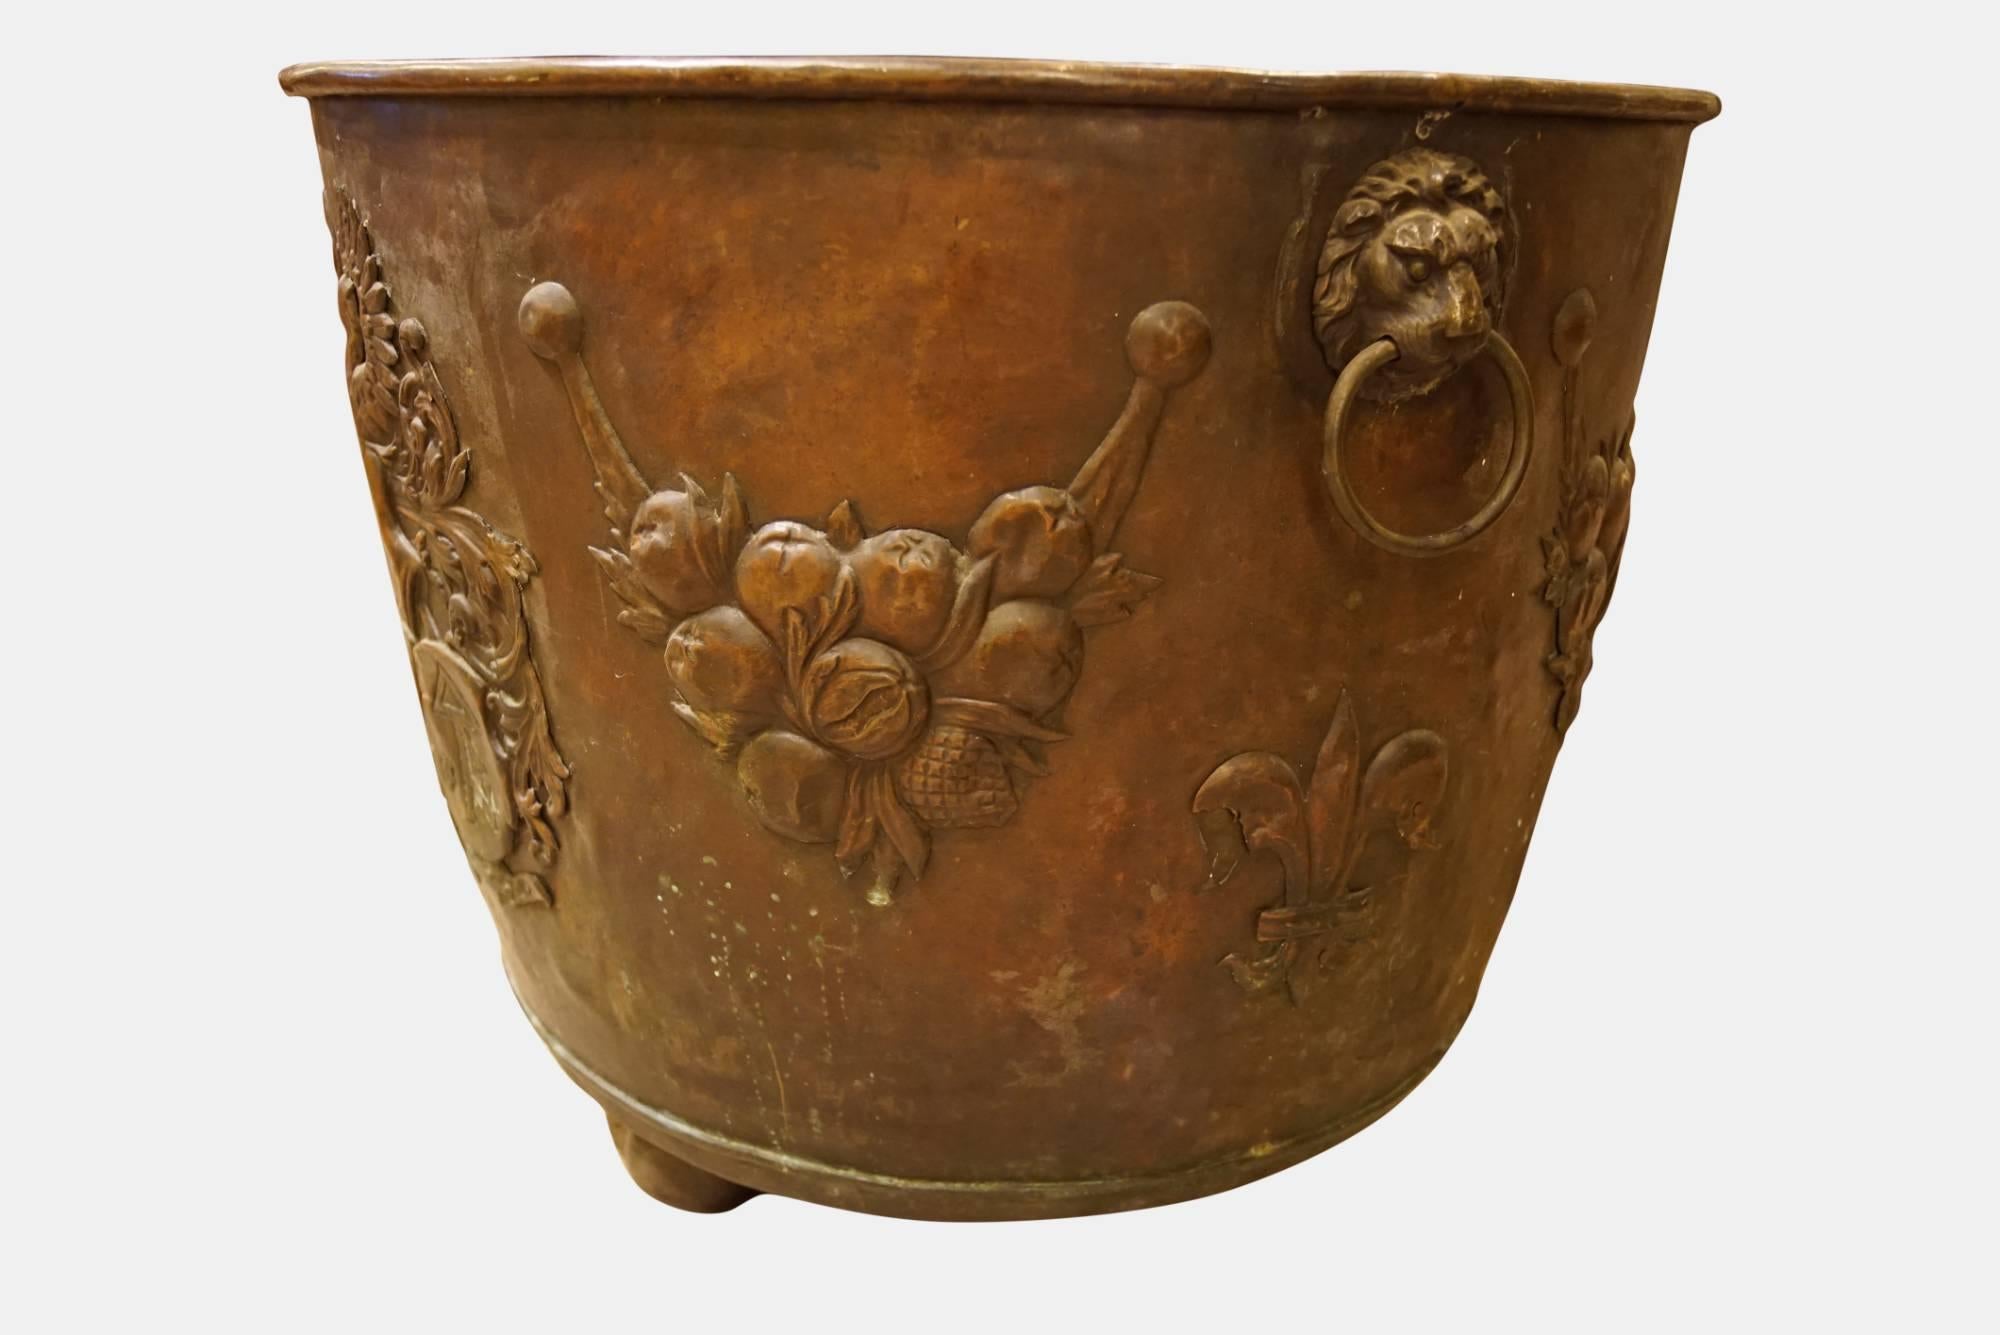 A large copper log bin with armorial decoration,

circa 1890.